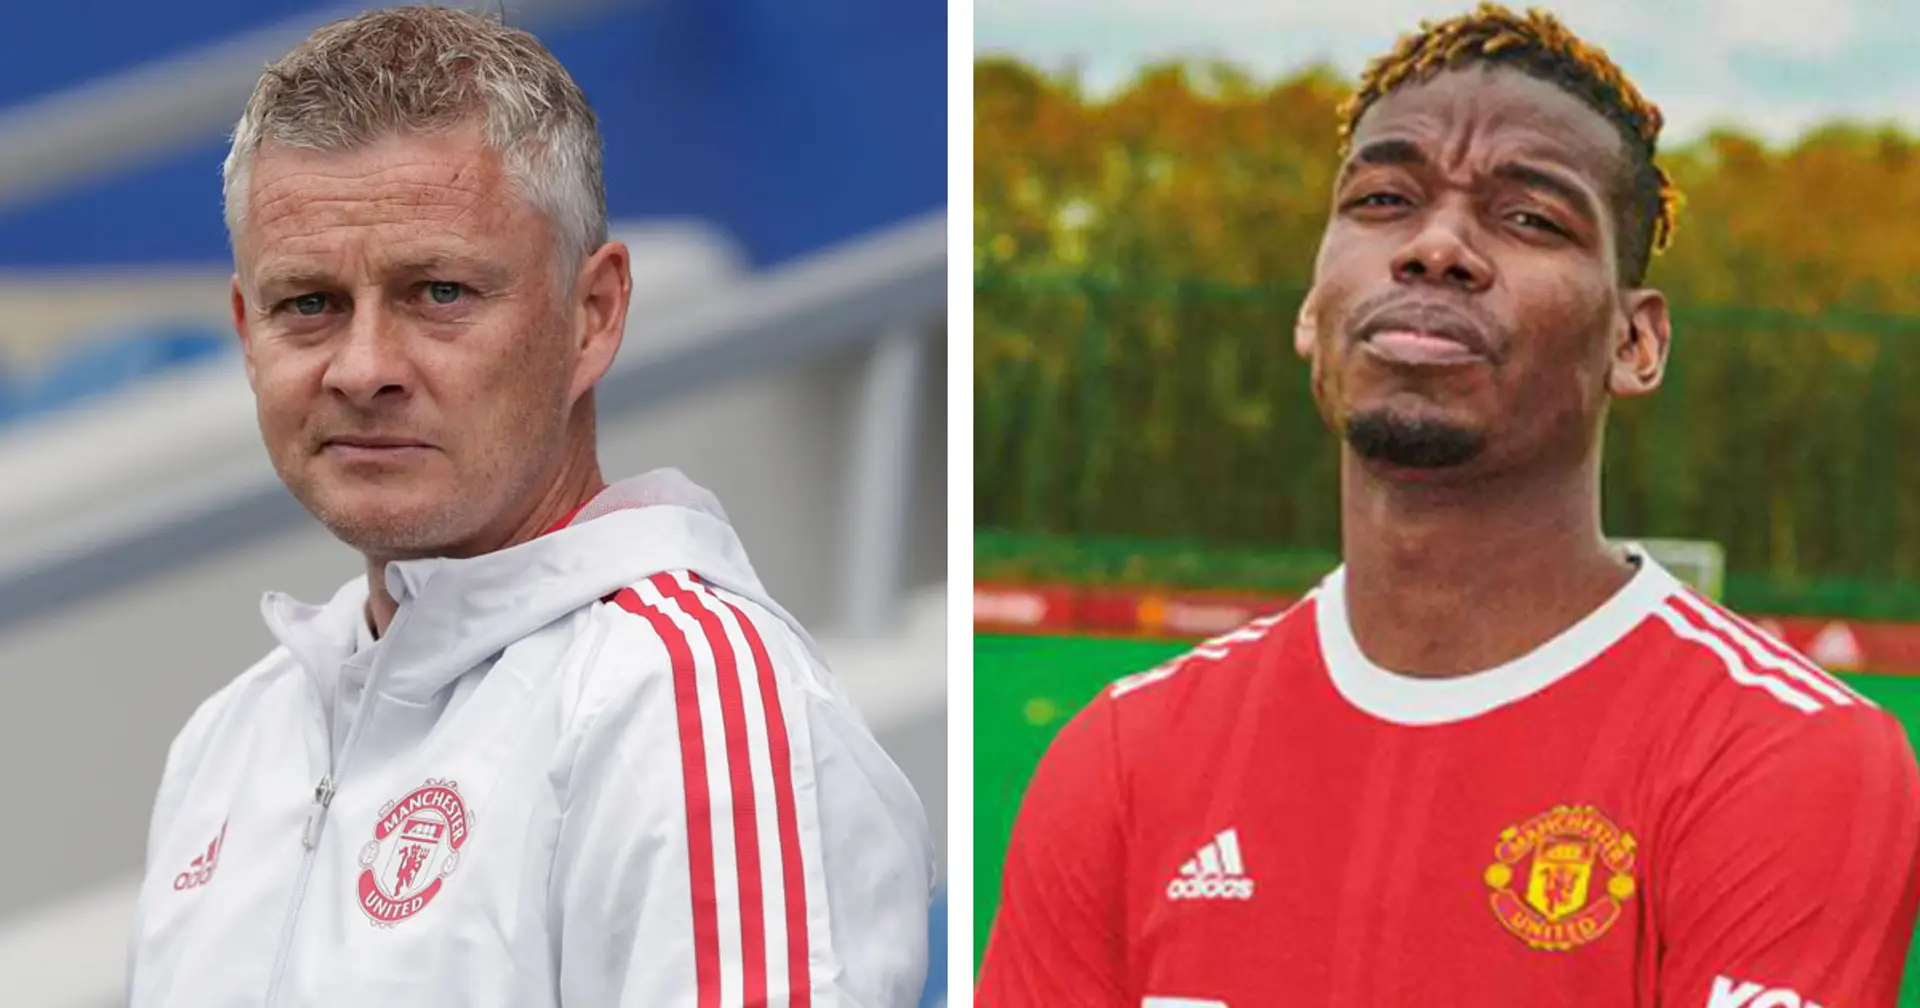 Solskjaer gives key update on Pogba's future & 4 more big United stories you might've missed